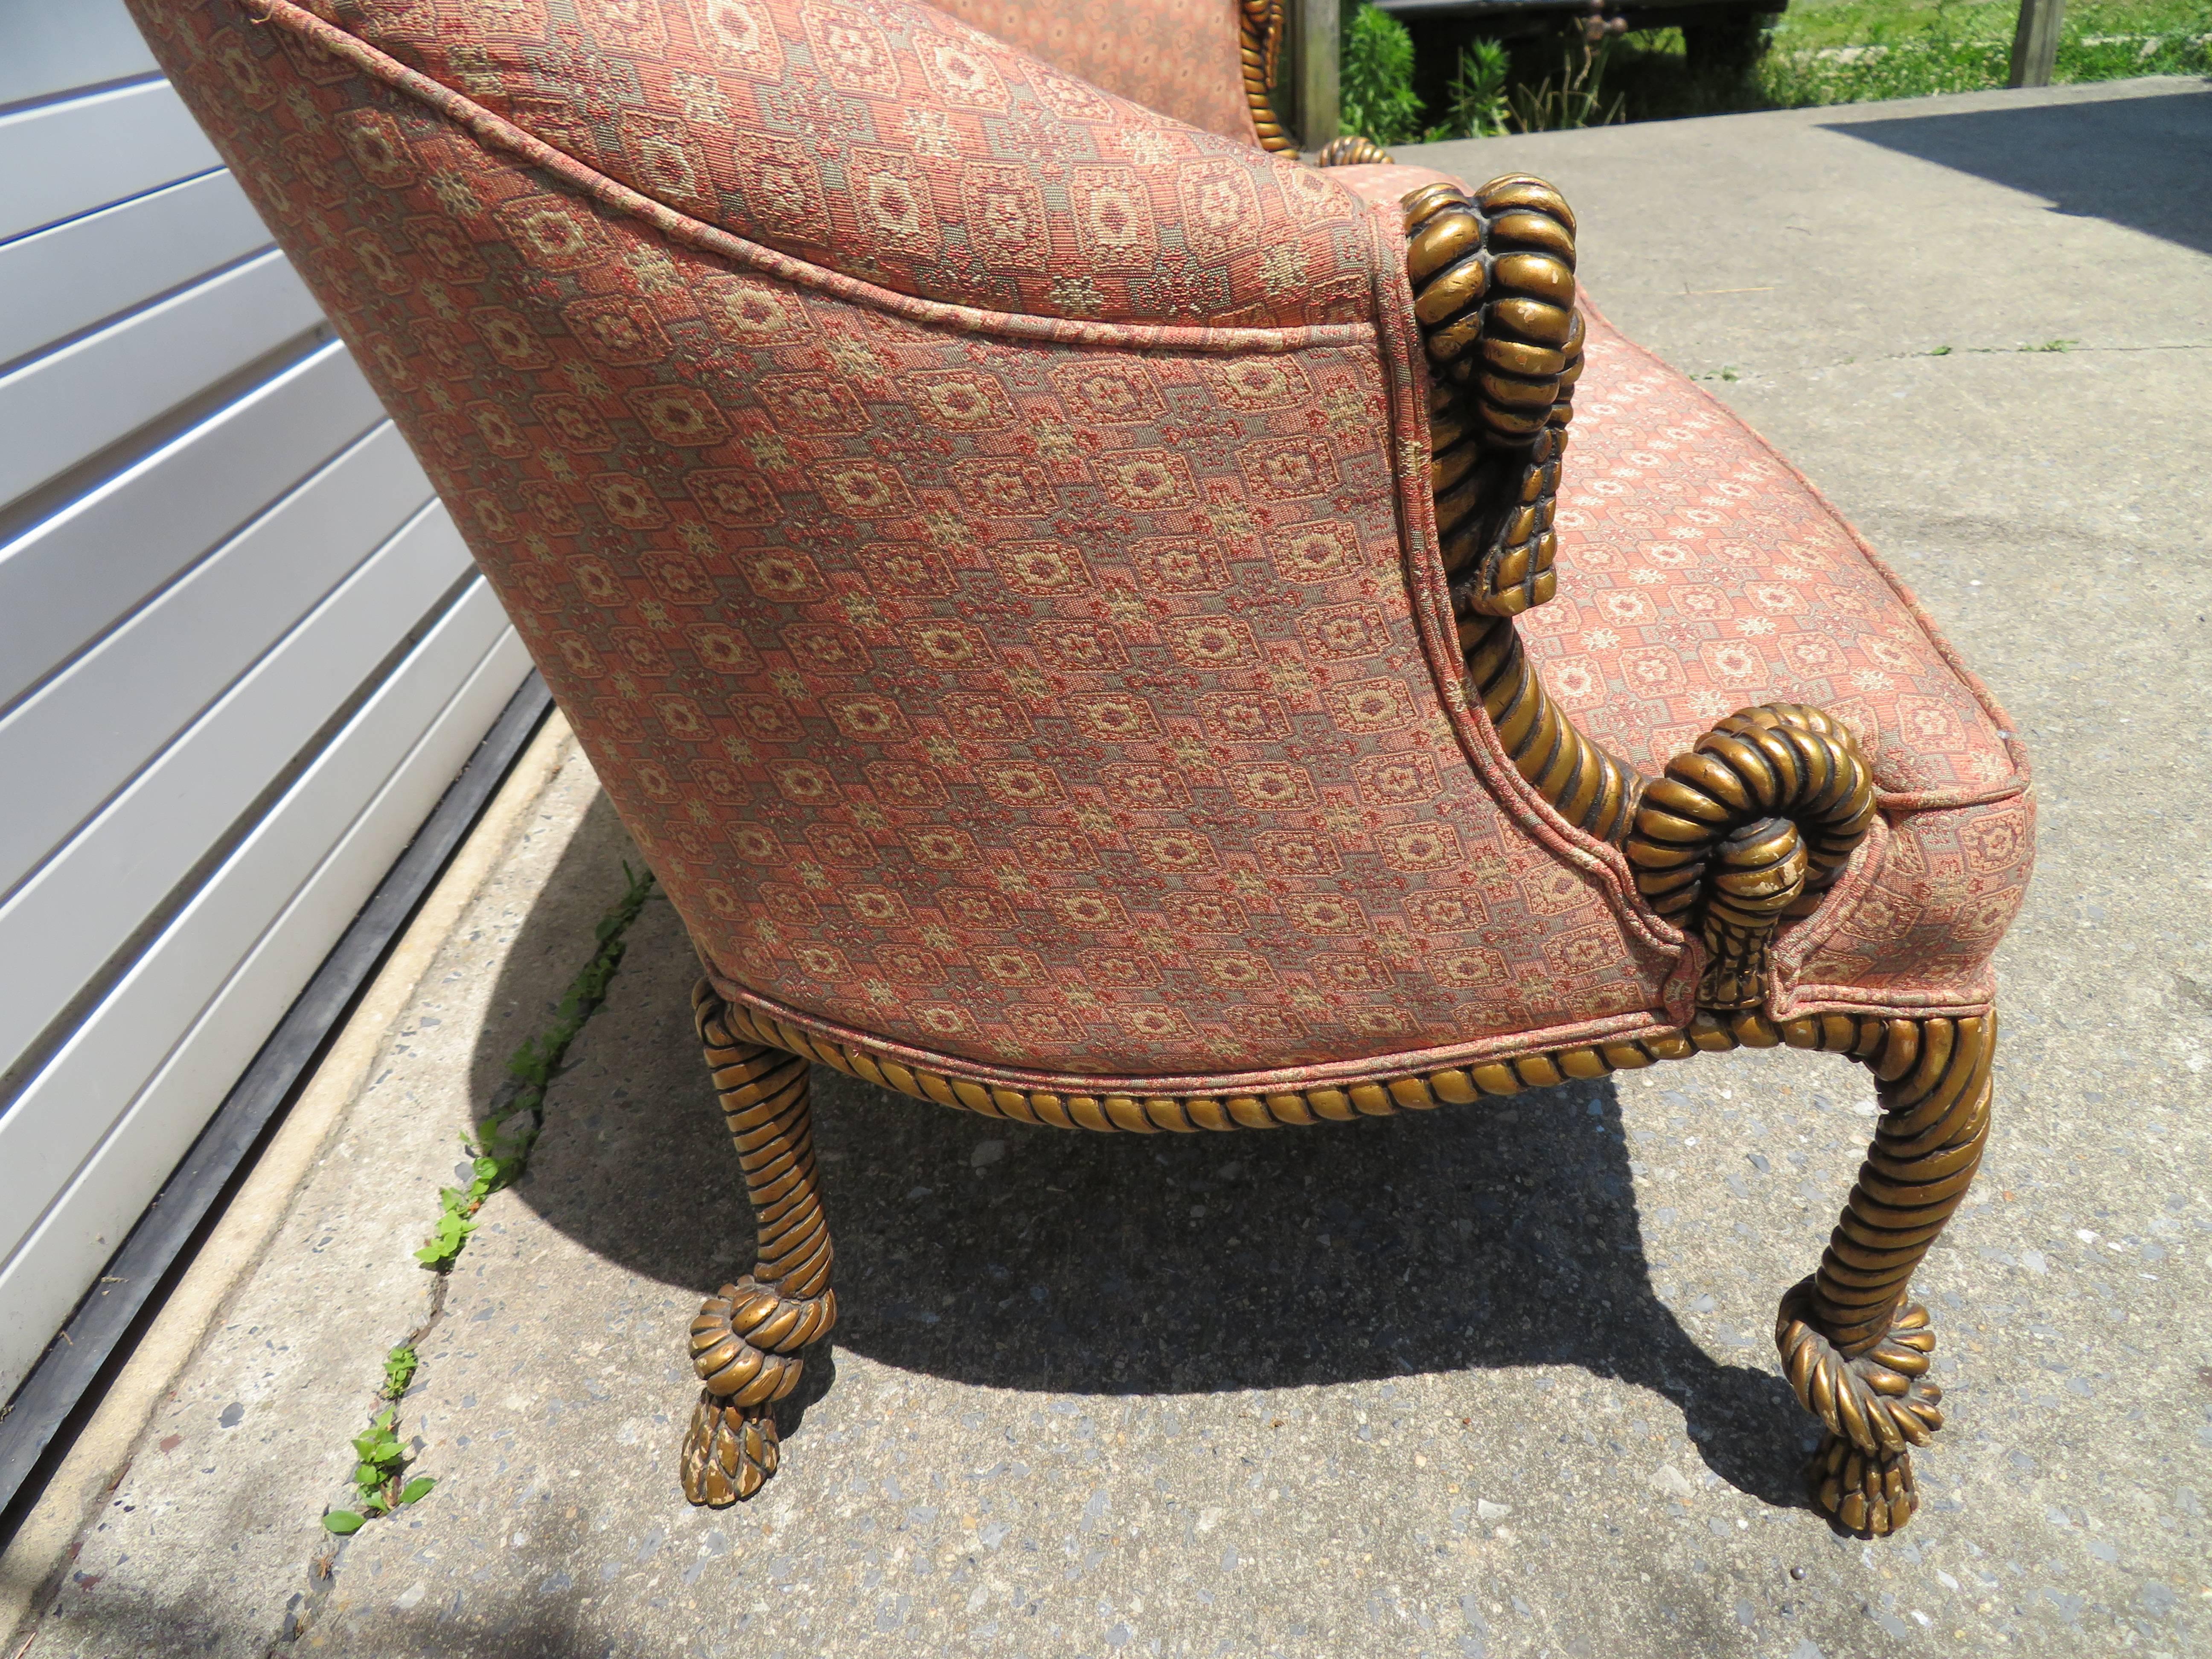 Hollywood Regency Magnificent Rope and Tasseled Gilded Sofa Regency Modern Dorothy Draper Style For Sale